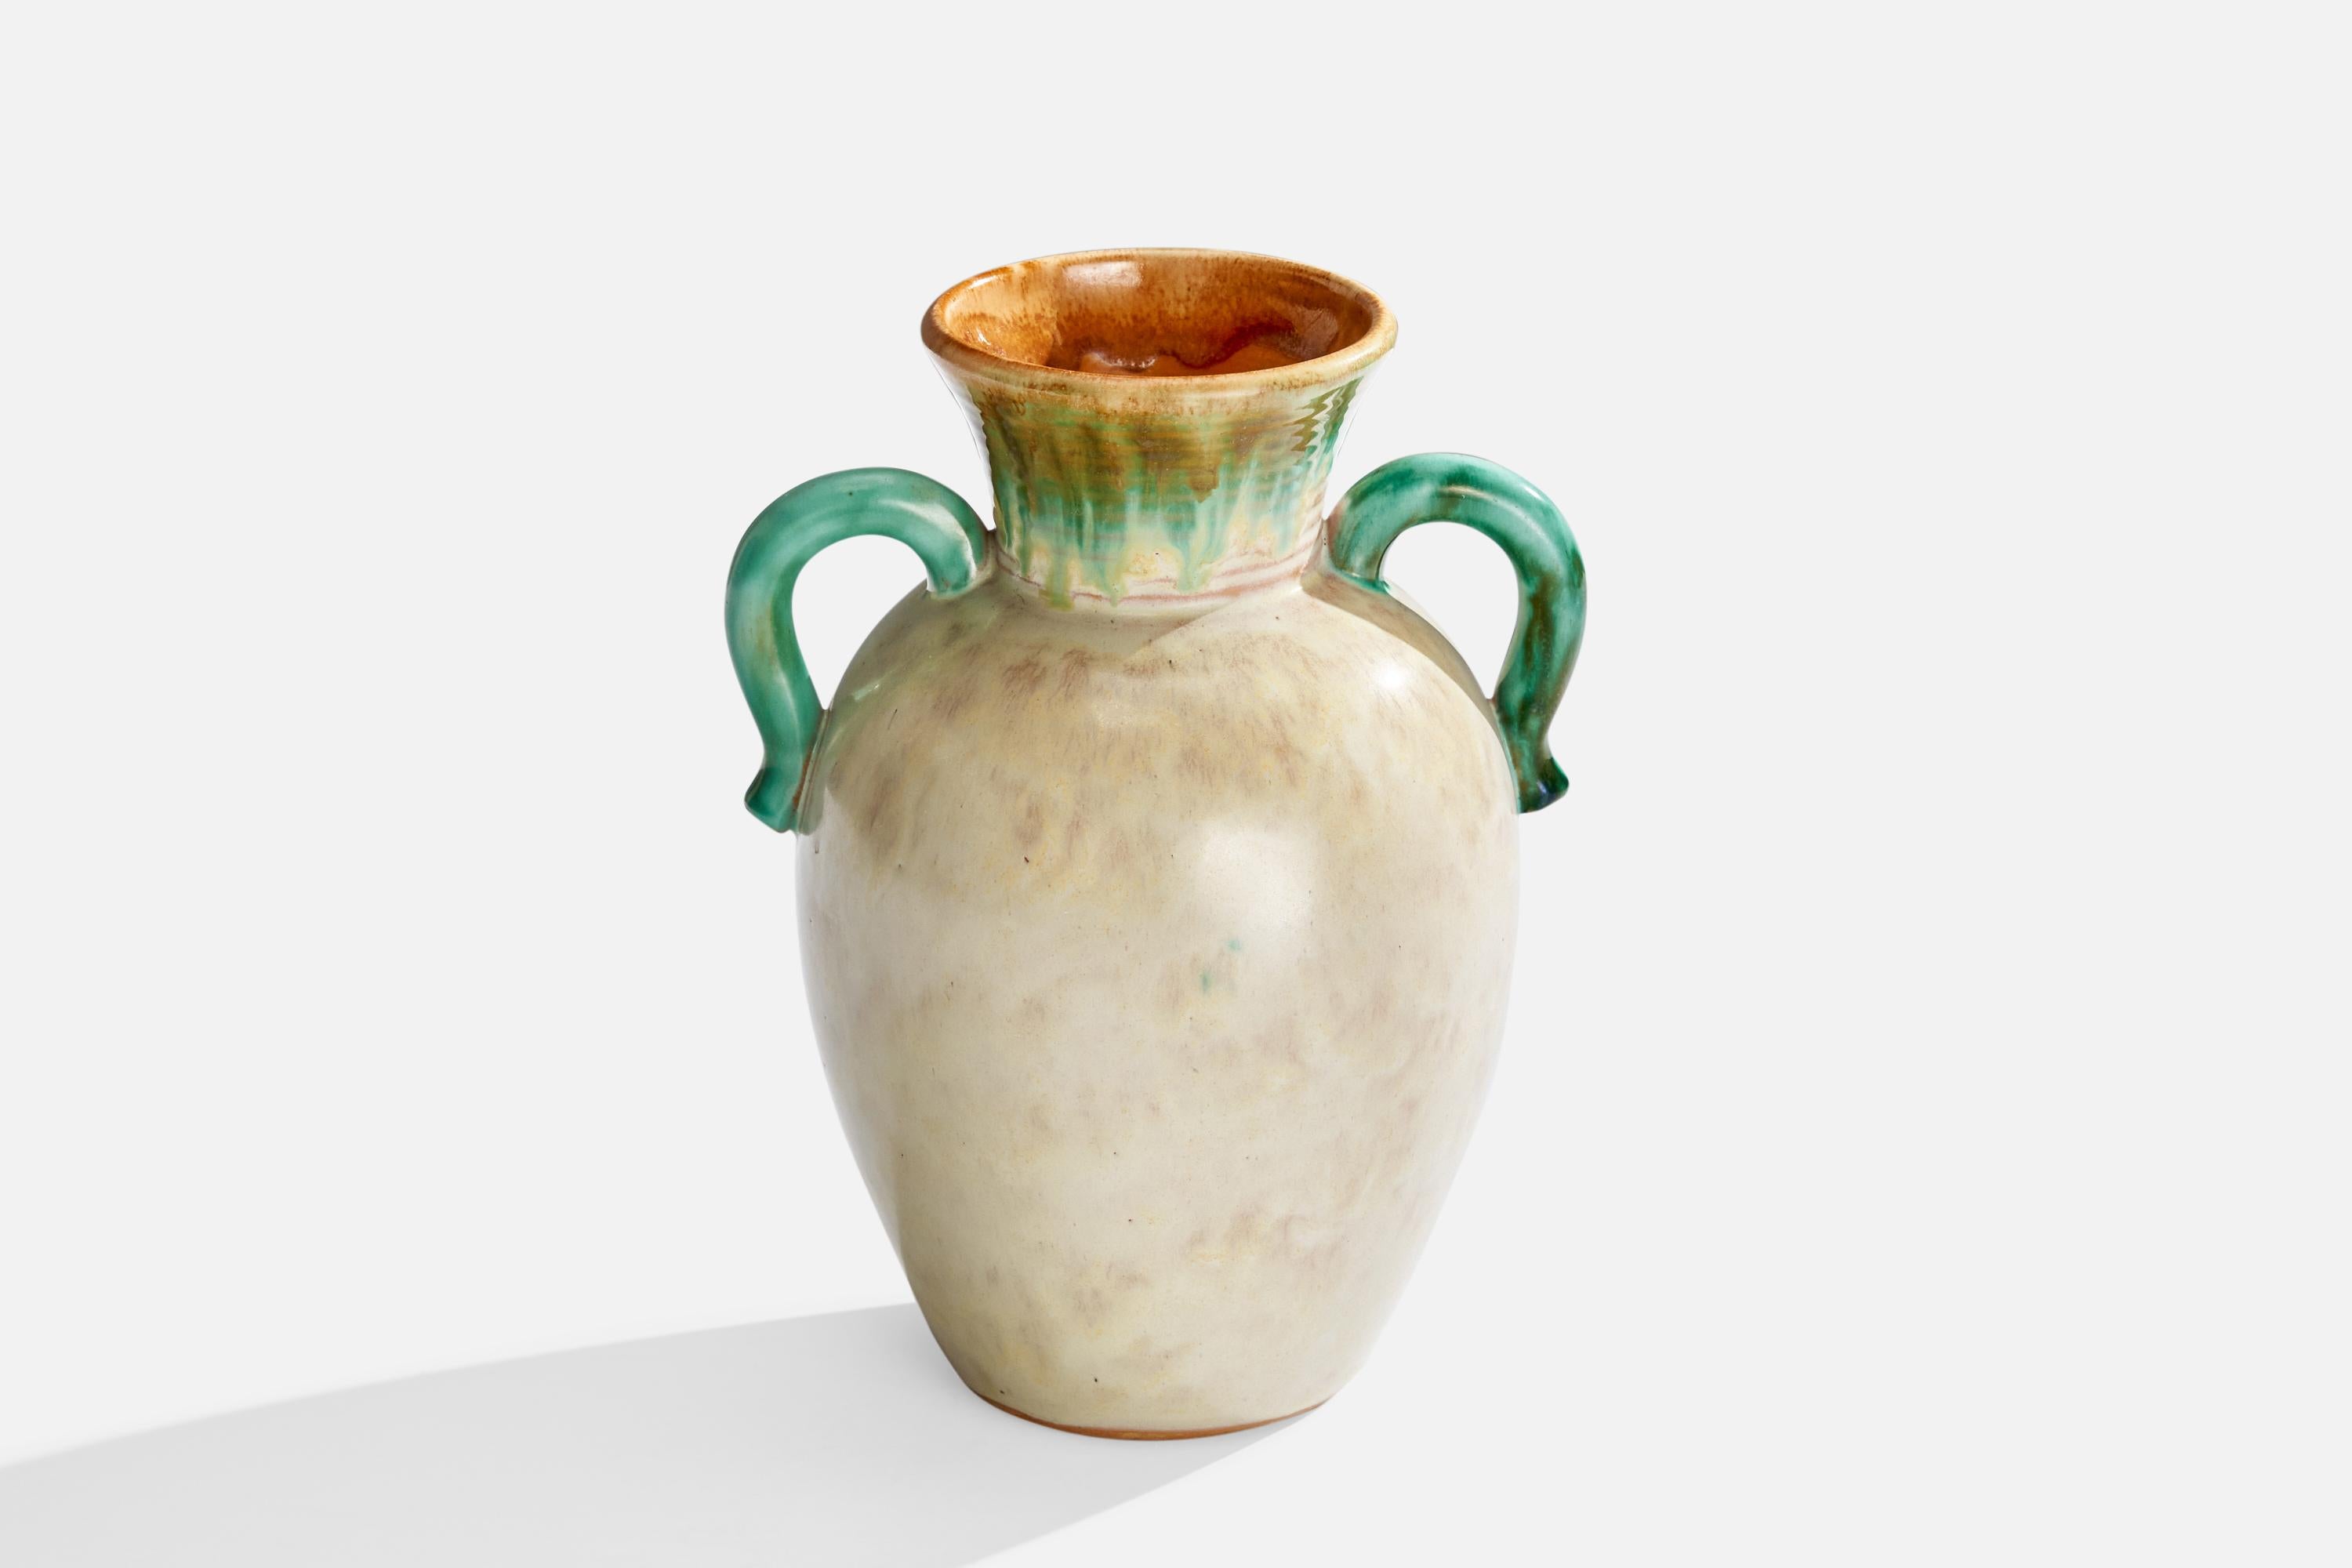 An off-white and green-glazed ceramic vase designed by Christer Heijl and produced by Töreboda Keramik, Sweden, 1930s.